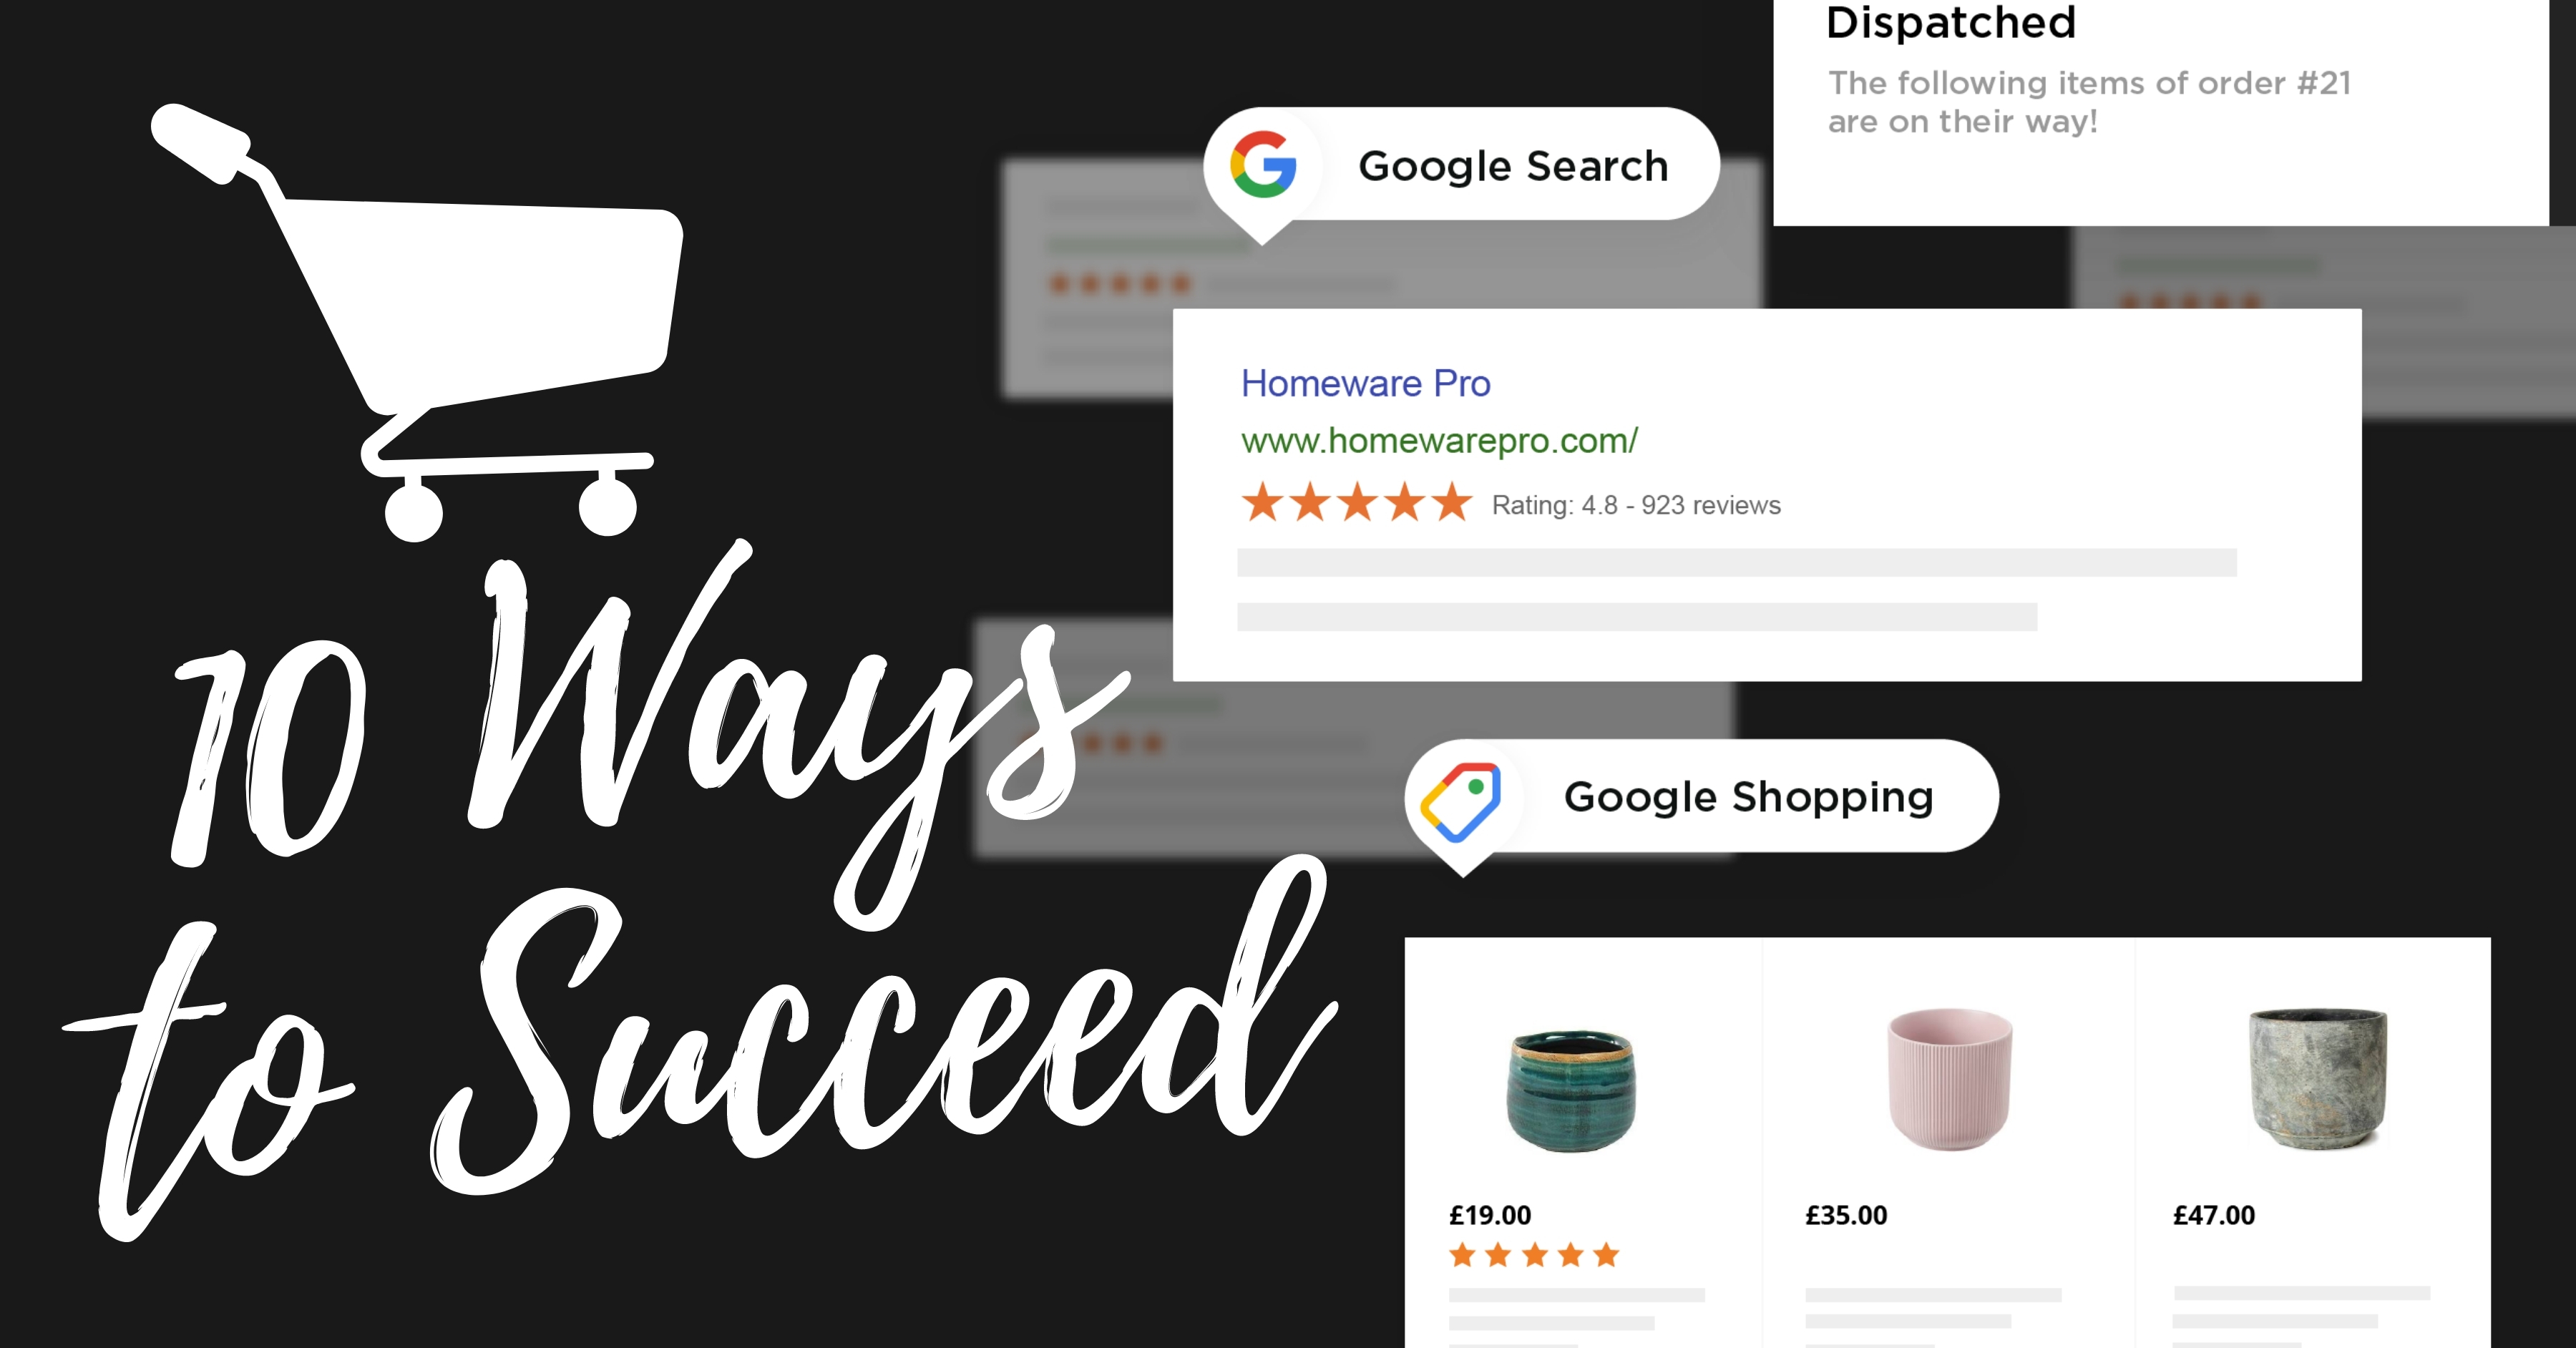 10 ways to Succeed at Google Shopping